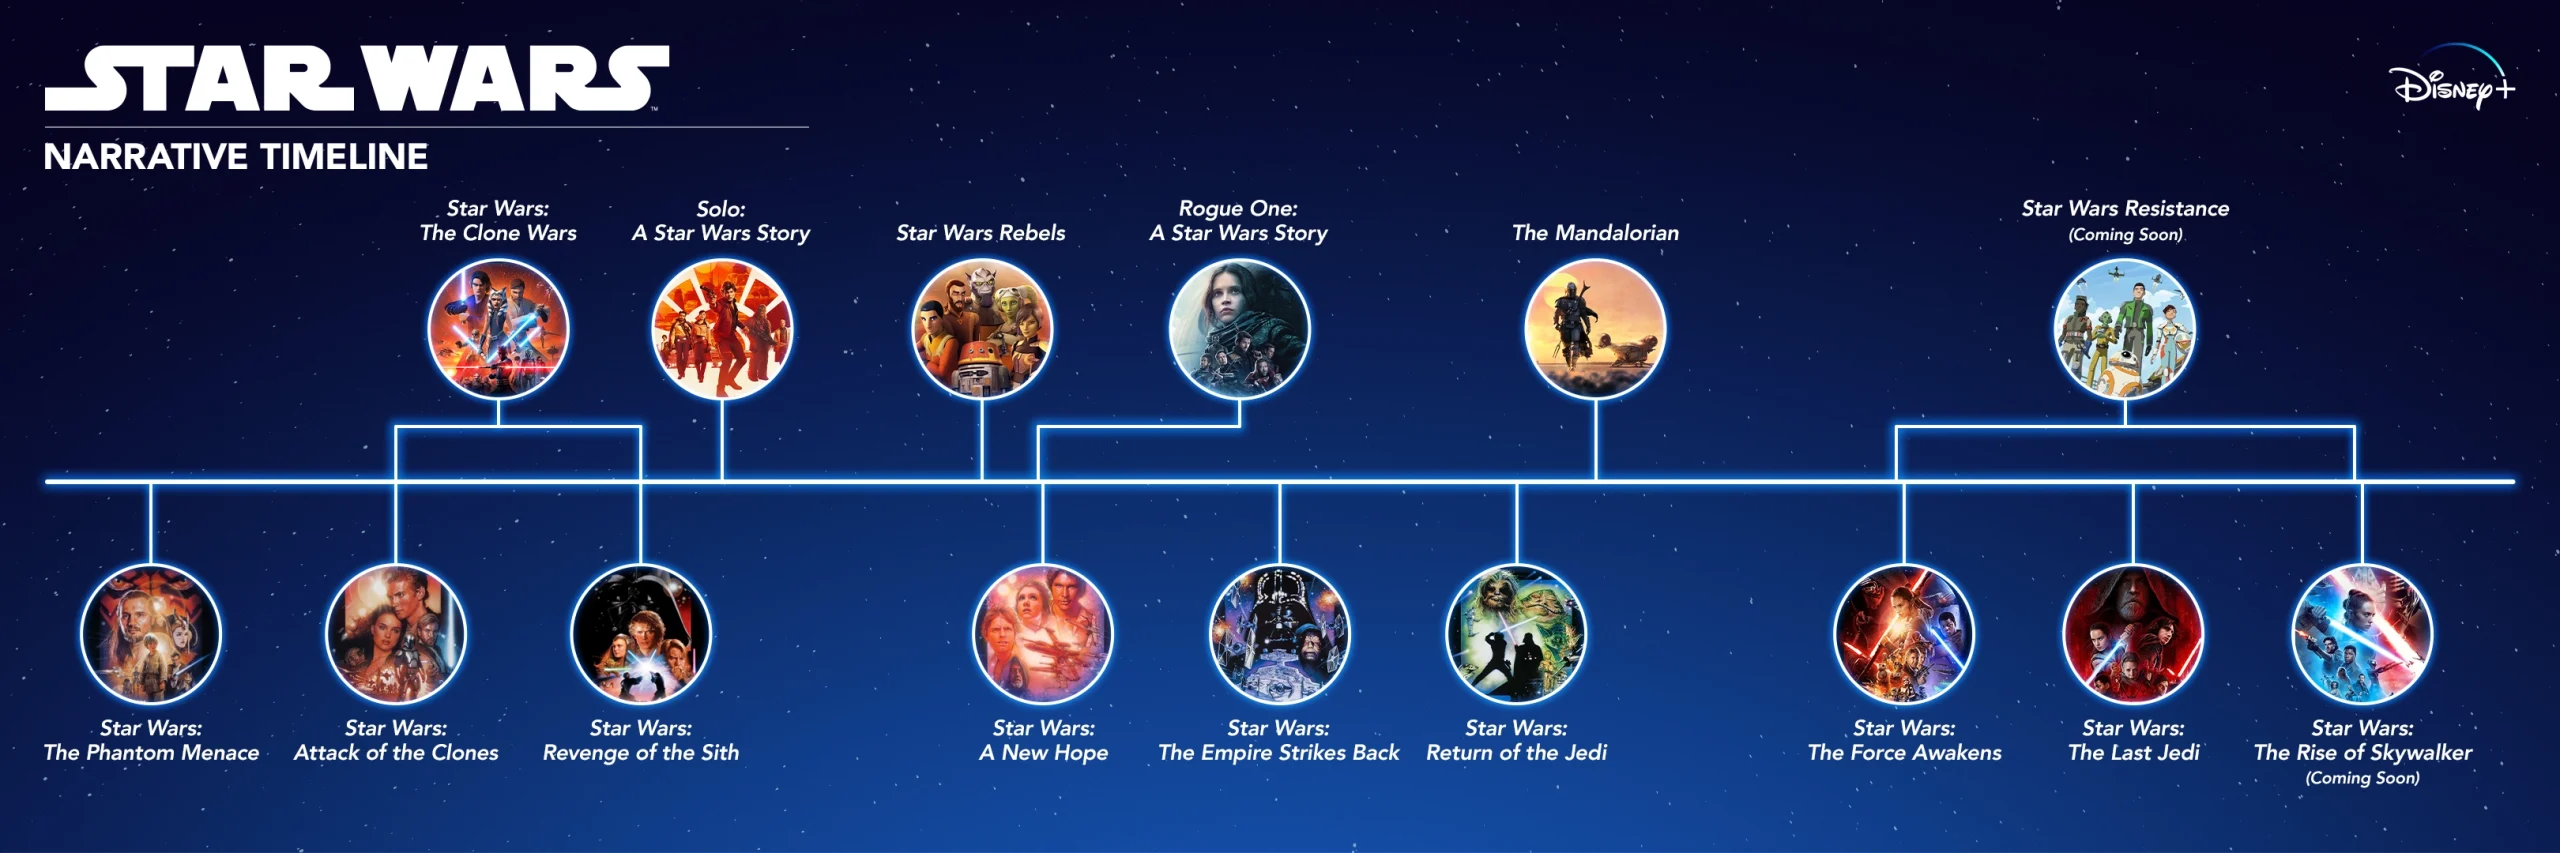 Exploring the Star Wars Universe in Chronological Order